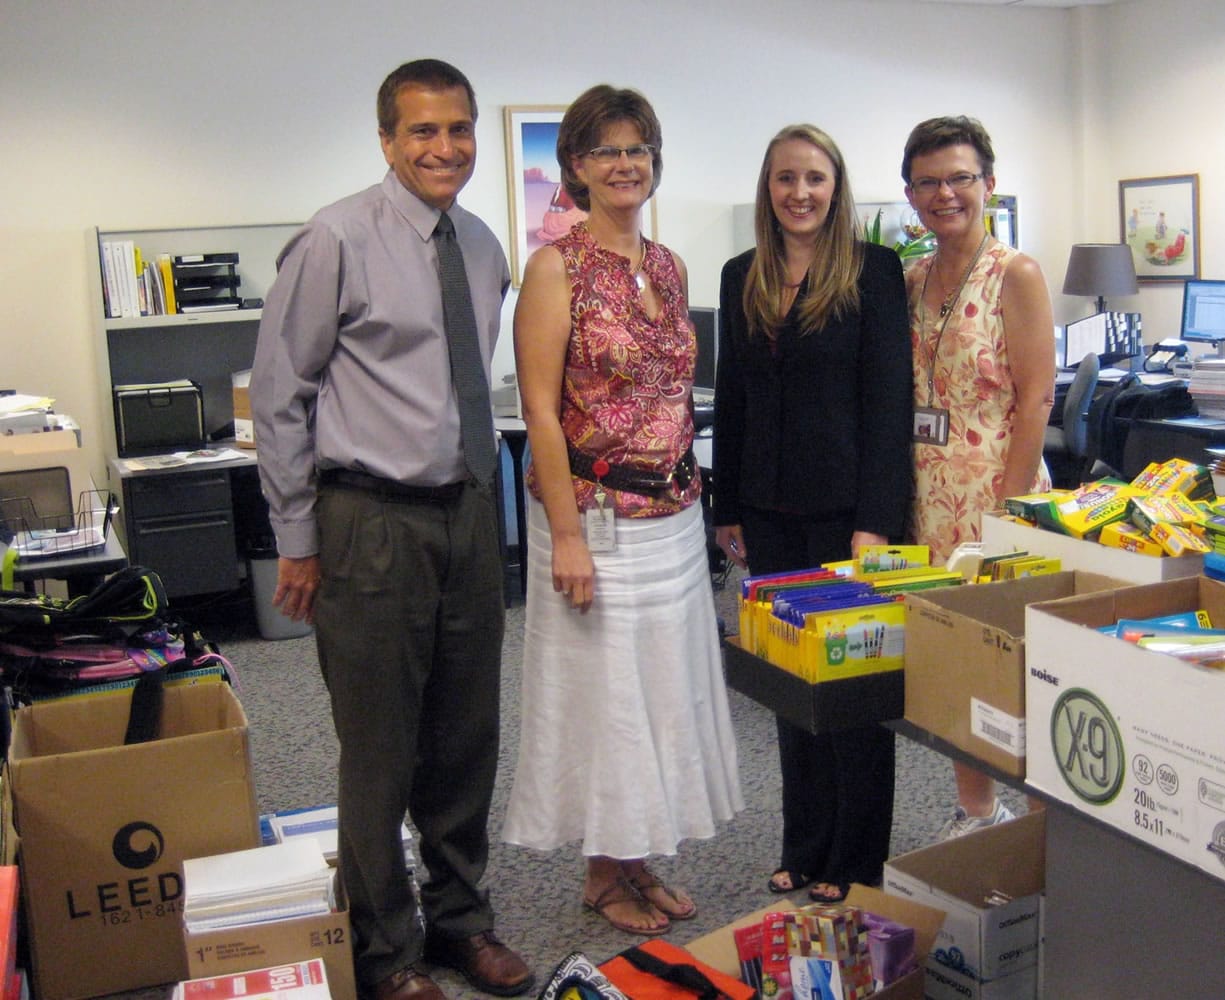 Alan Hamilton, from left, First Independent Bank senior manager of community investments, Jan Redding, Foundation for Vancouver Public Schools assistant director, Susan DeRenzo, First Independent Bank financial adviser, and Tara Taylor, Foundation for Vancouver Public Schools executive director, are surrounded by school supplies collected by the Foundation for Vancouver Public Schools.